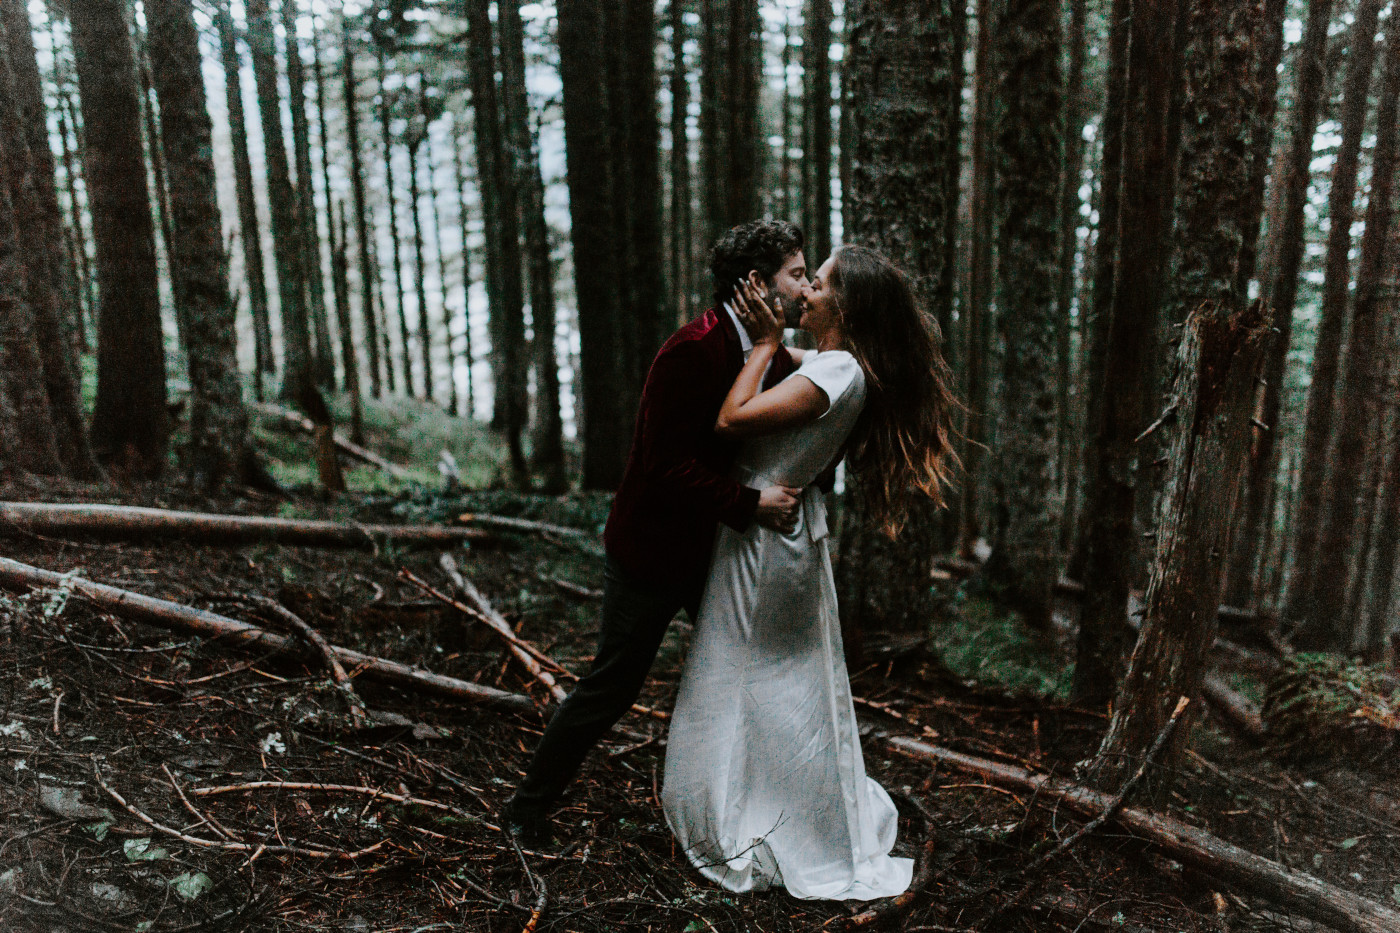 Katelyn and Murray kiss in the forest. Elopement wedding photography at Mount Hood by Sienna Plus Josh.